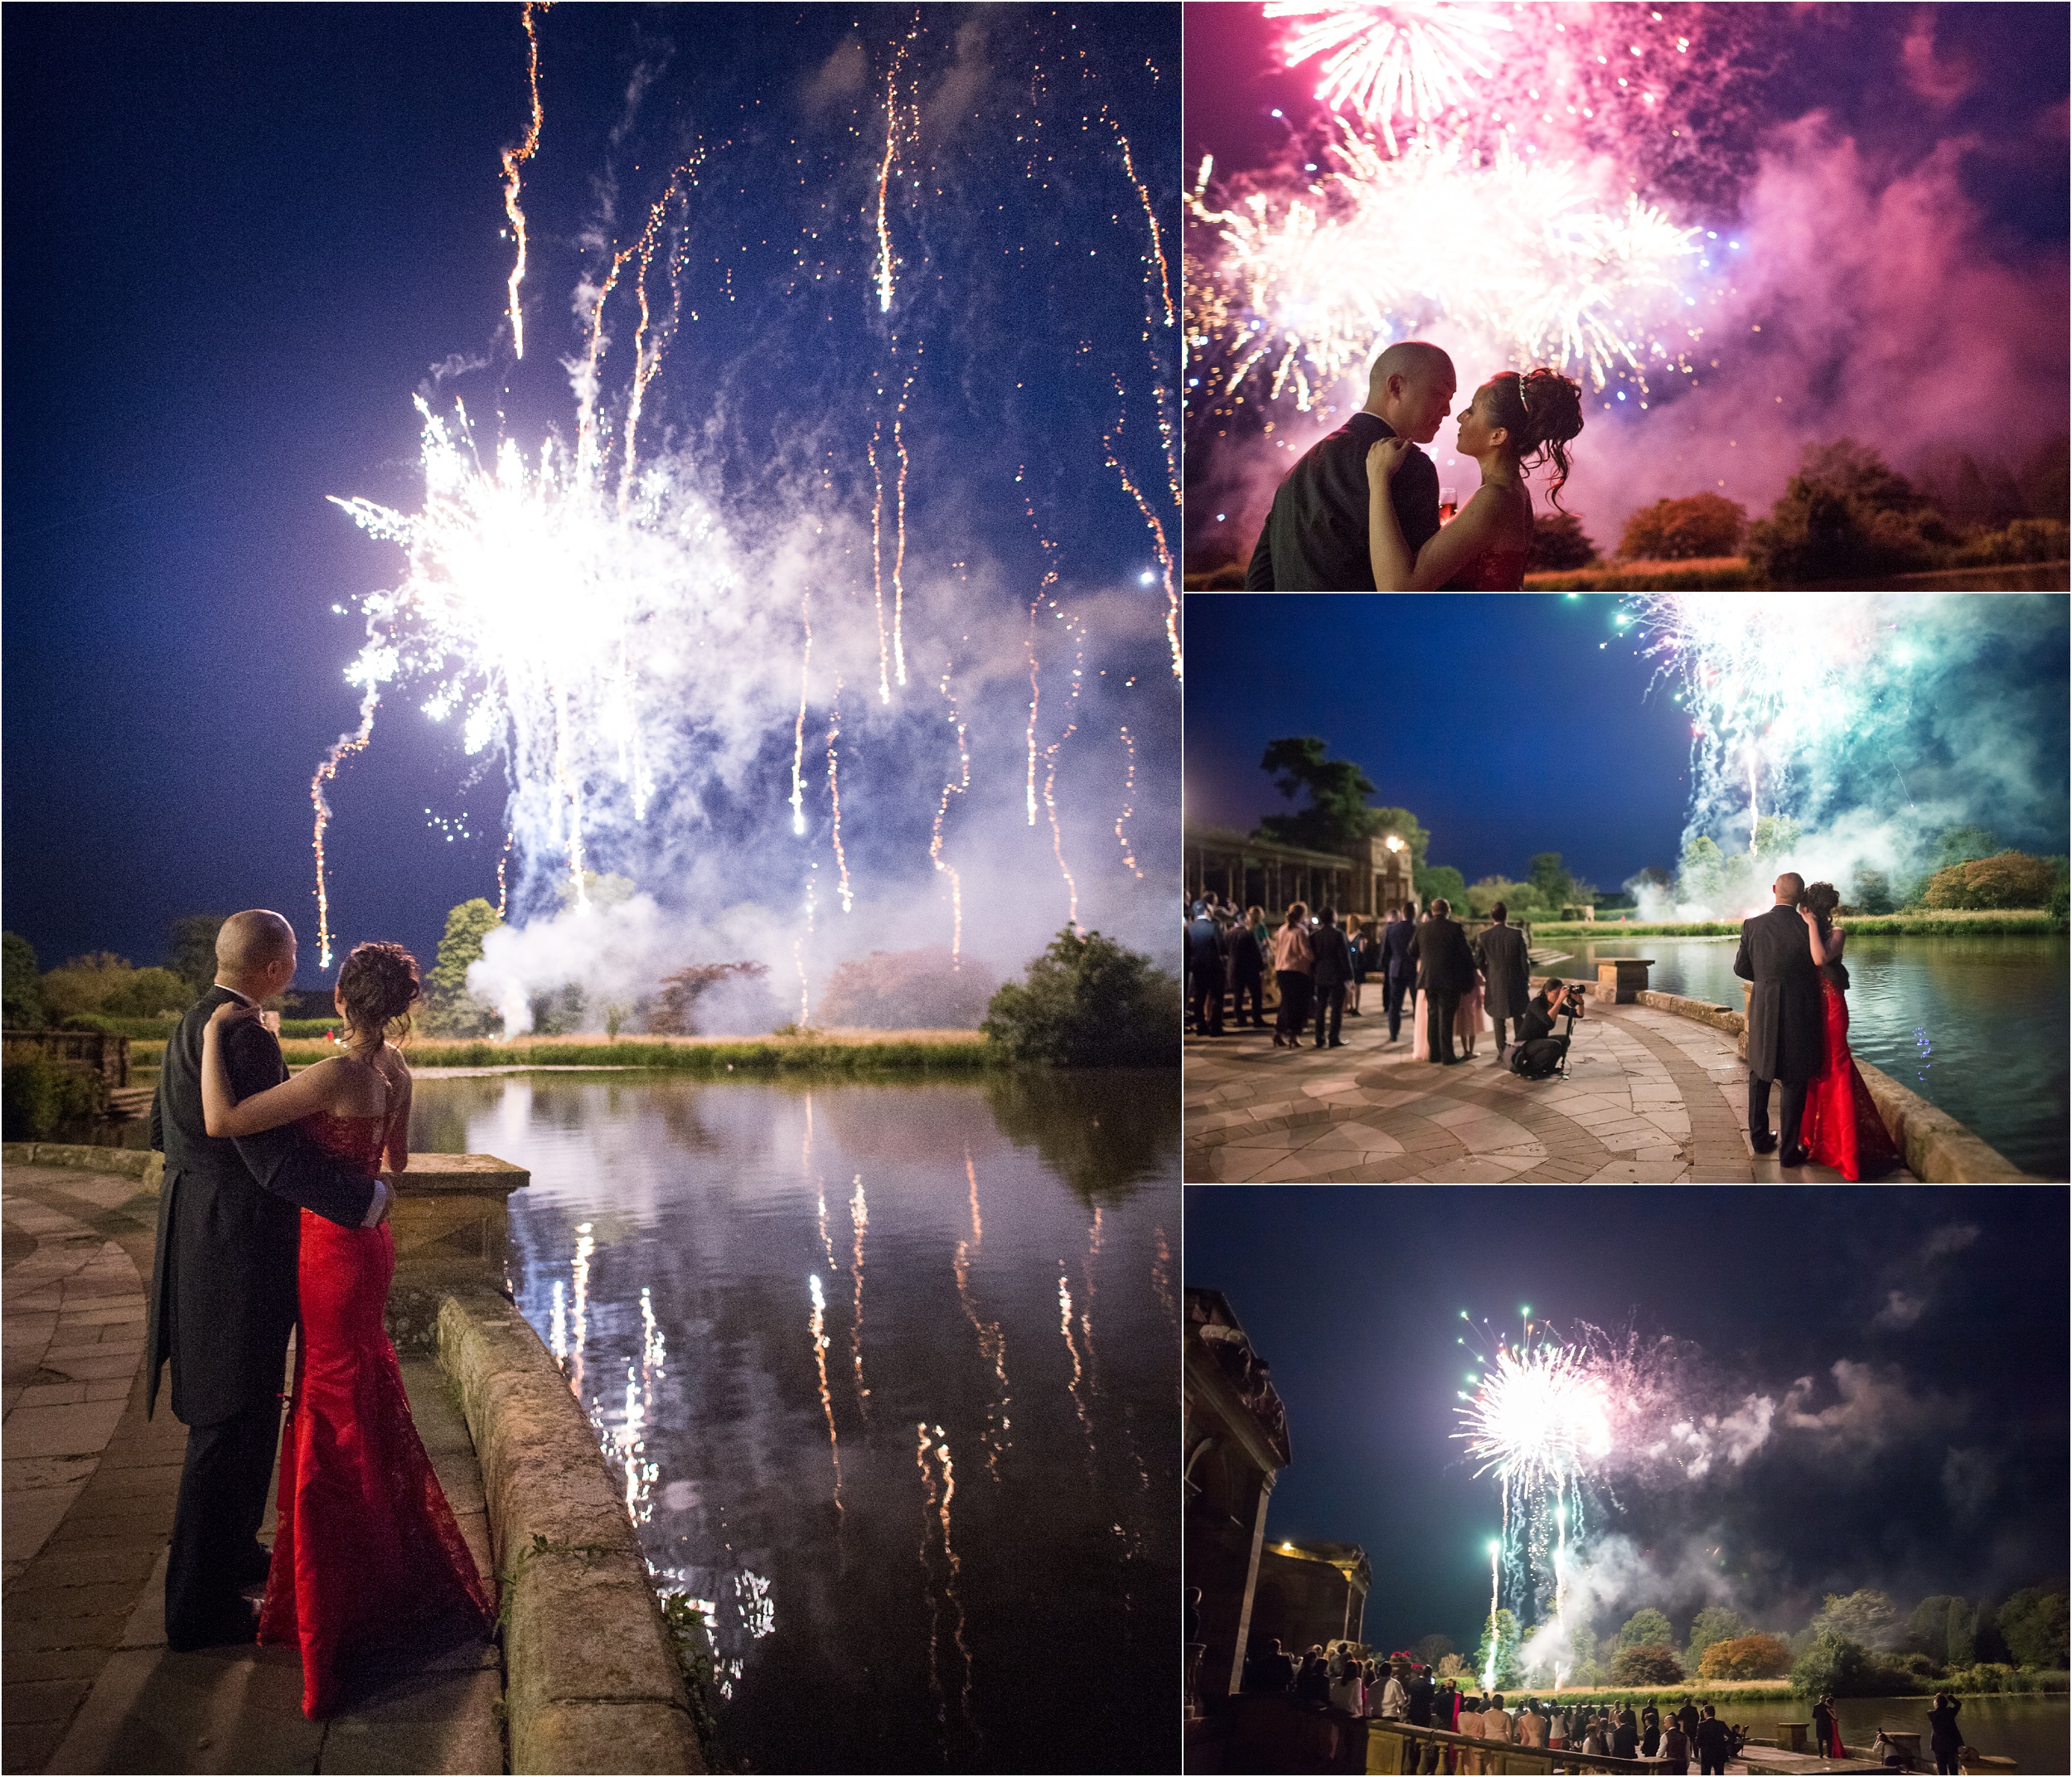 photographing fireworks at weddings